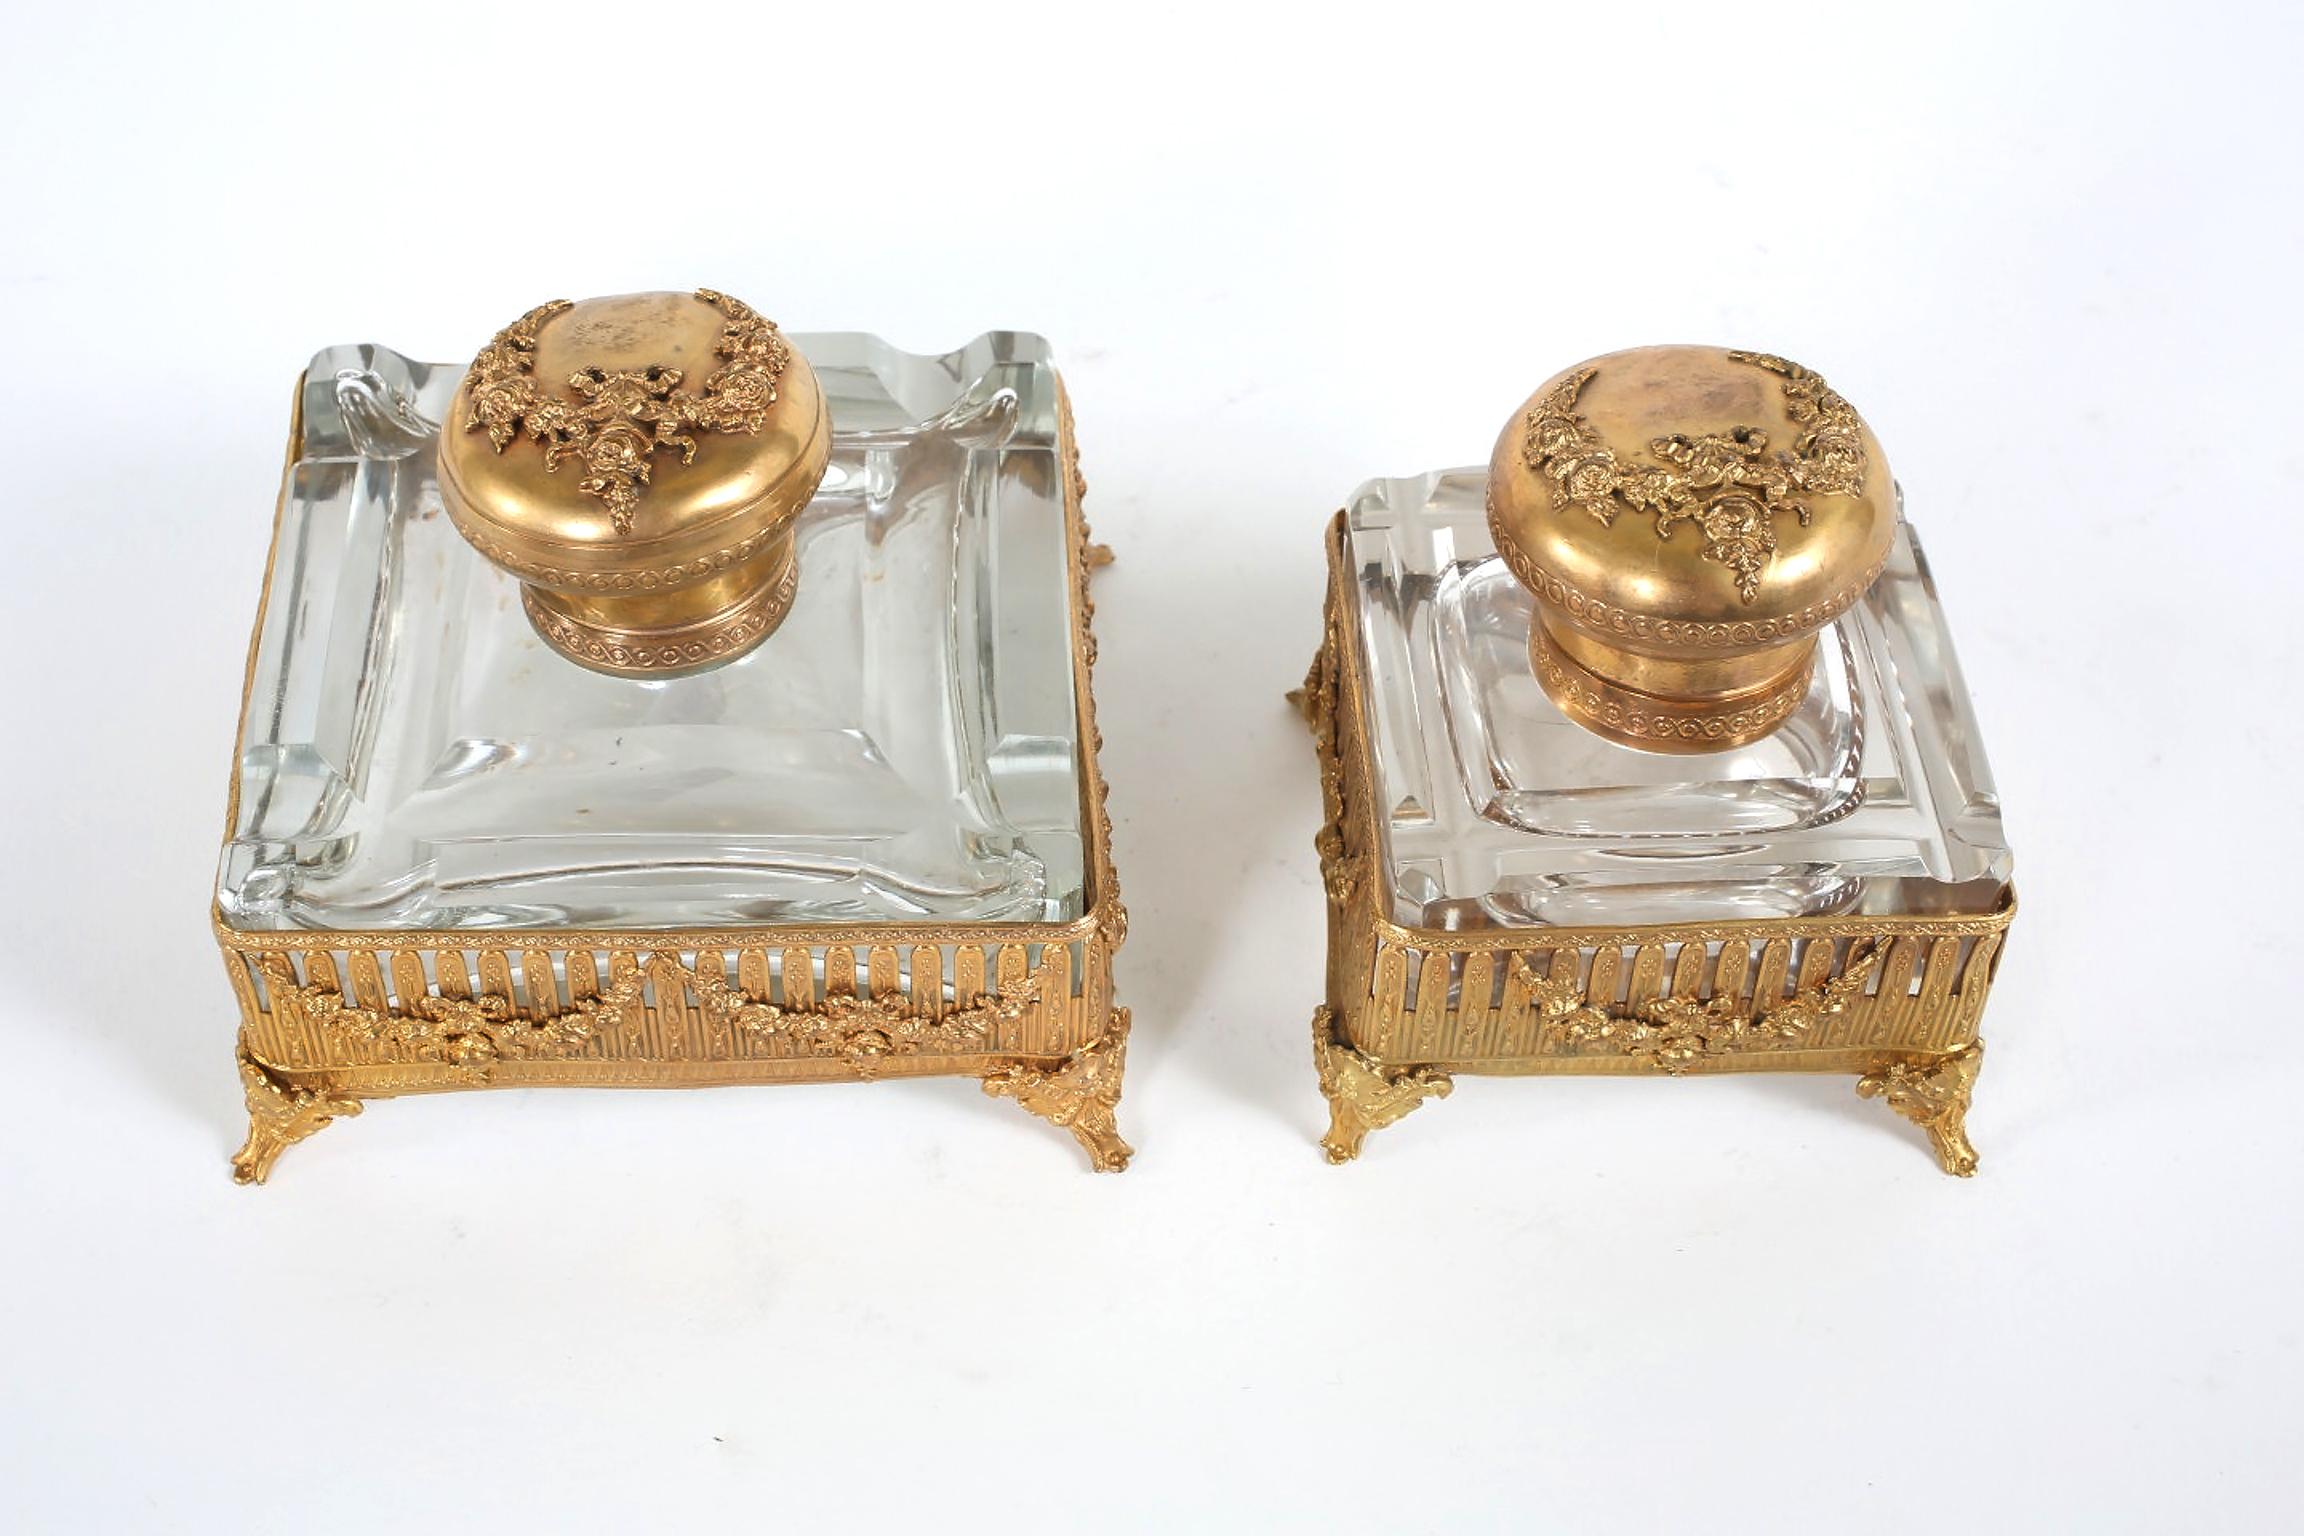 Pair of ornately gilt brass footed framed with cut glass holder inkwells. Each one is in great vintage condition with wear appropriate to age / use . Large one is 3. 3